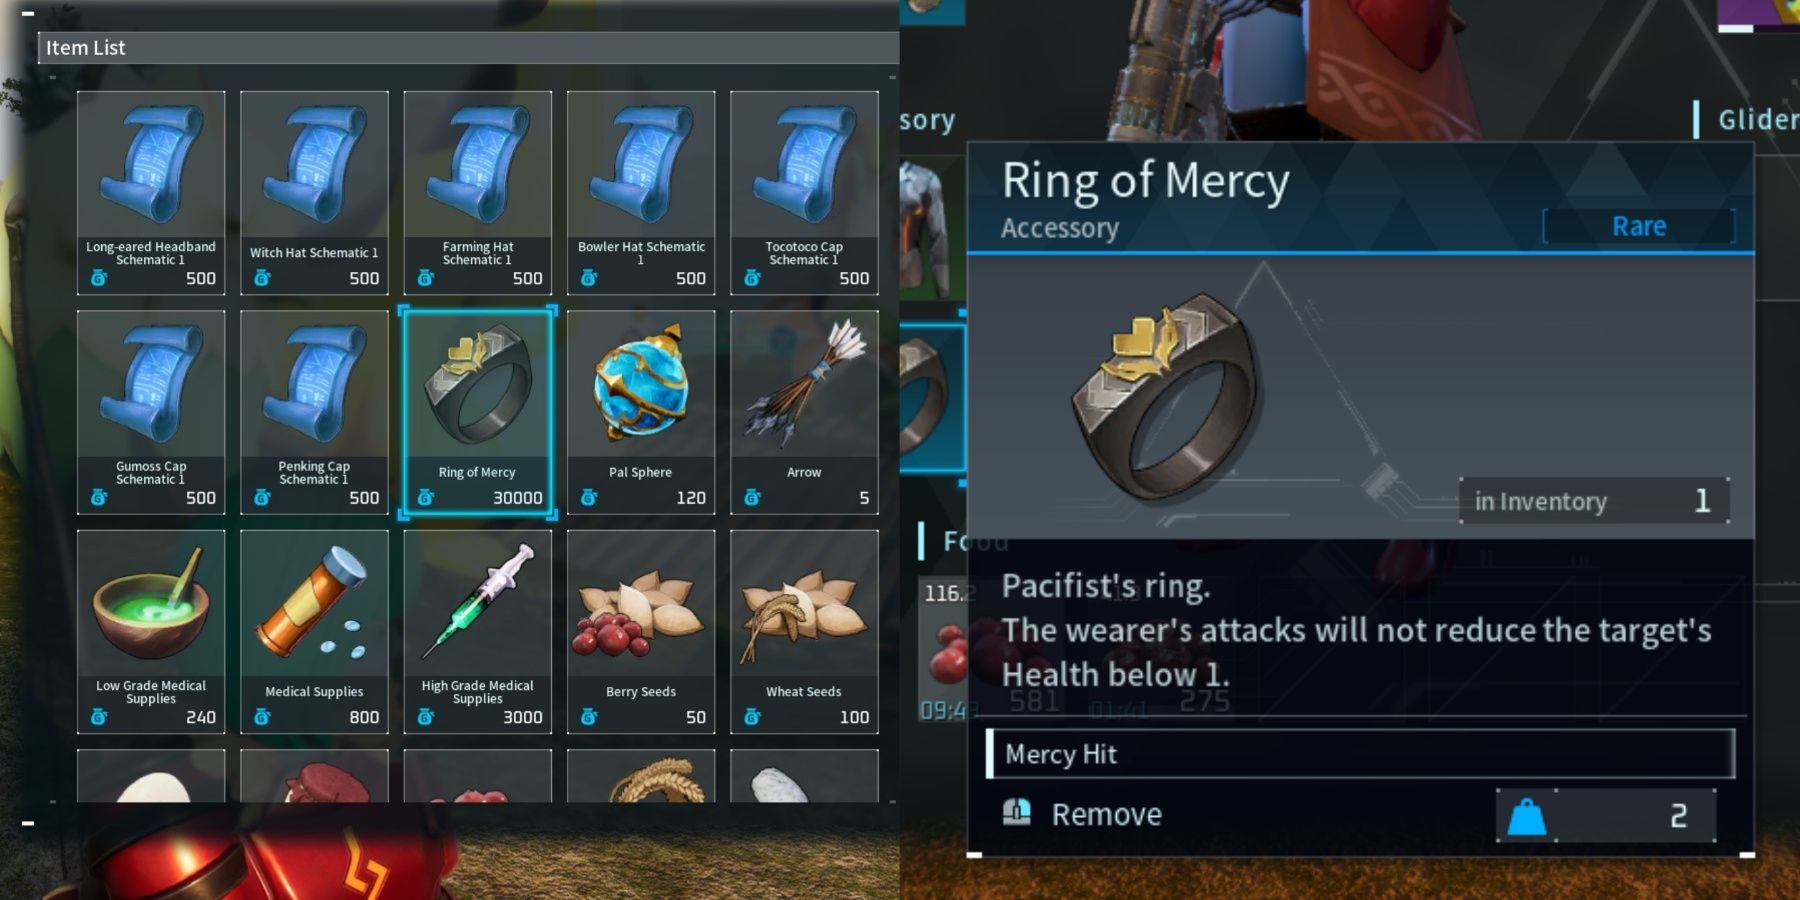 Palworld - How to Get Ring of Mercy